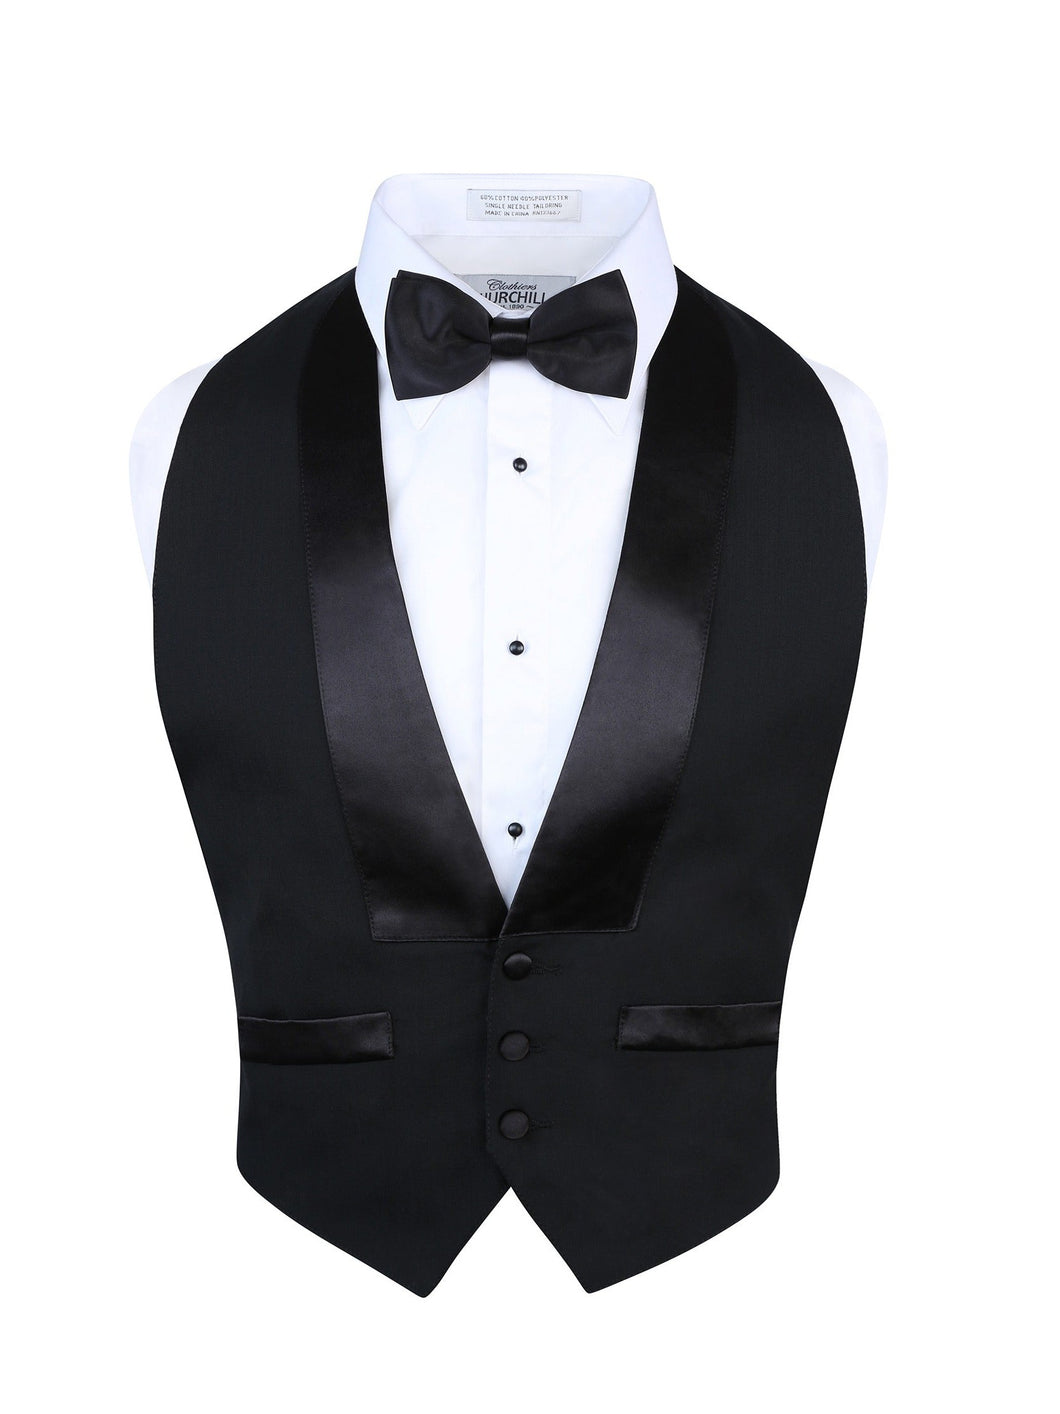 S.H. Churchill & Co. Men's Classic Formal Wool Black Backless Tuxedo Vest And Bow Tie